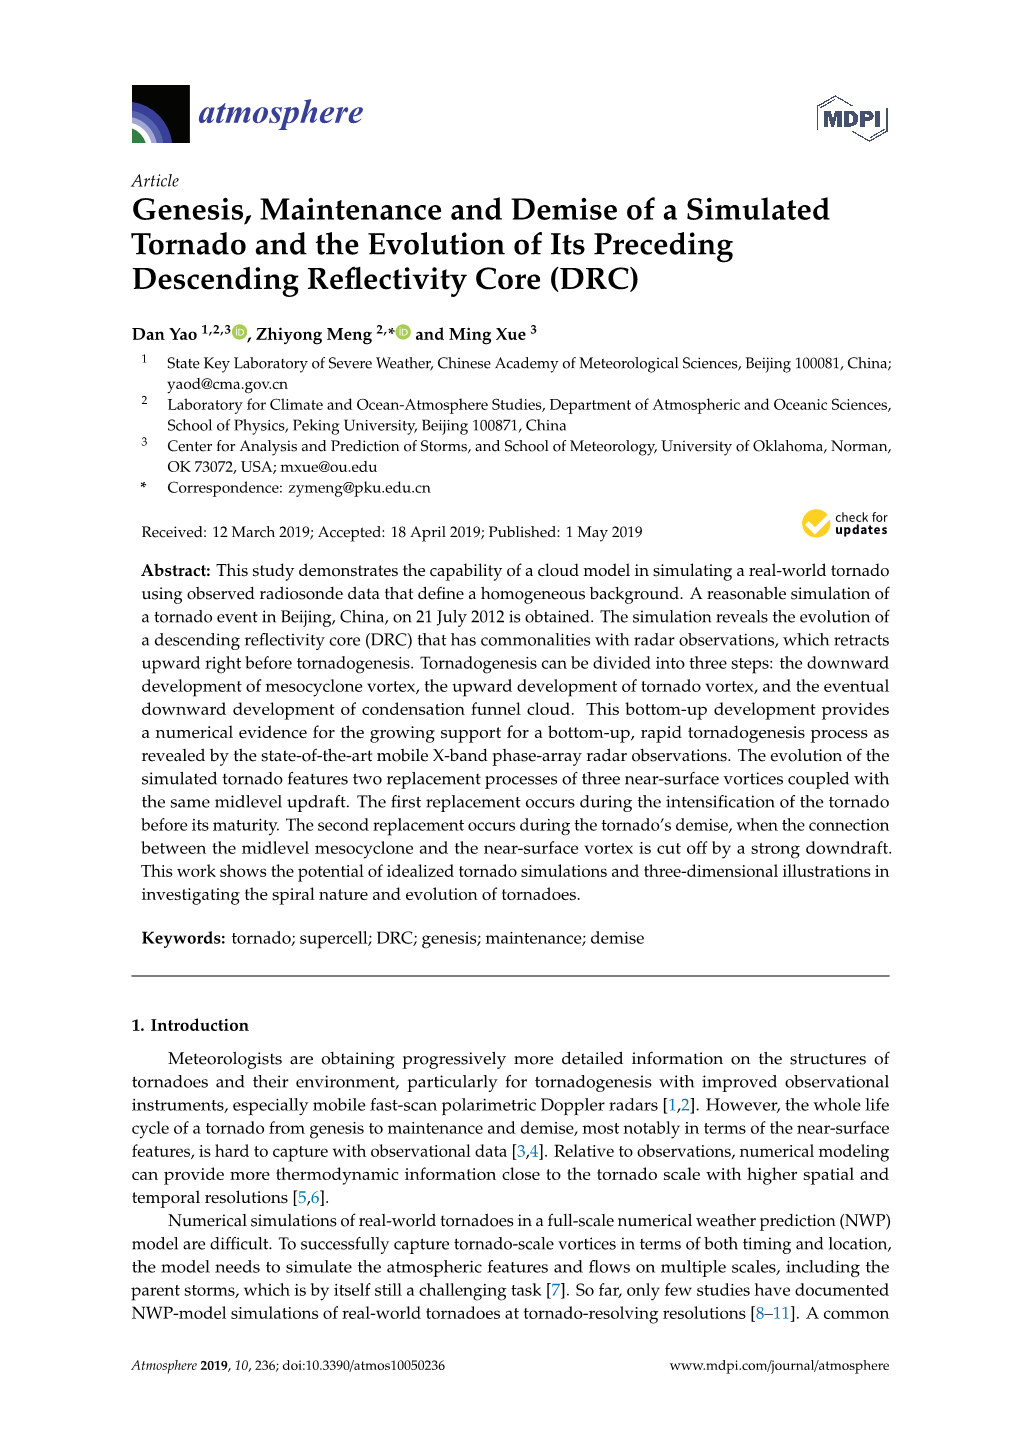 Genesis, Maintenance and Demise of a Simulated Tornado and the Evolution of Its Preceding Descending Reﬂectivity Core (DRC)